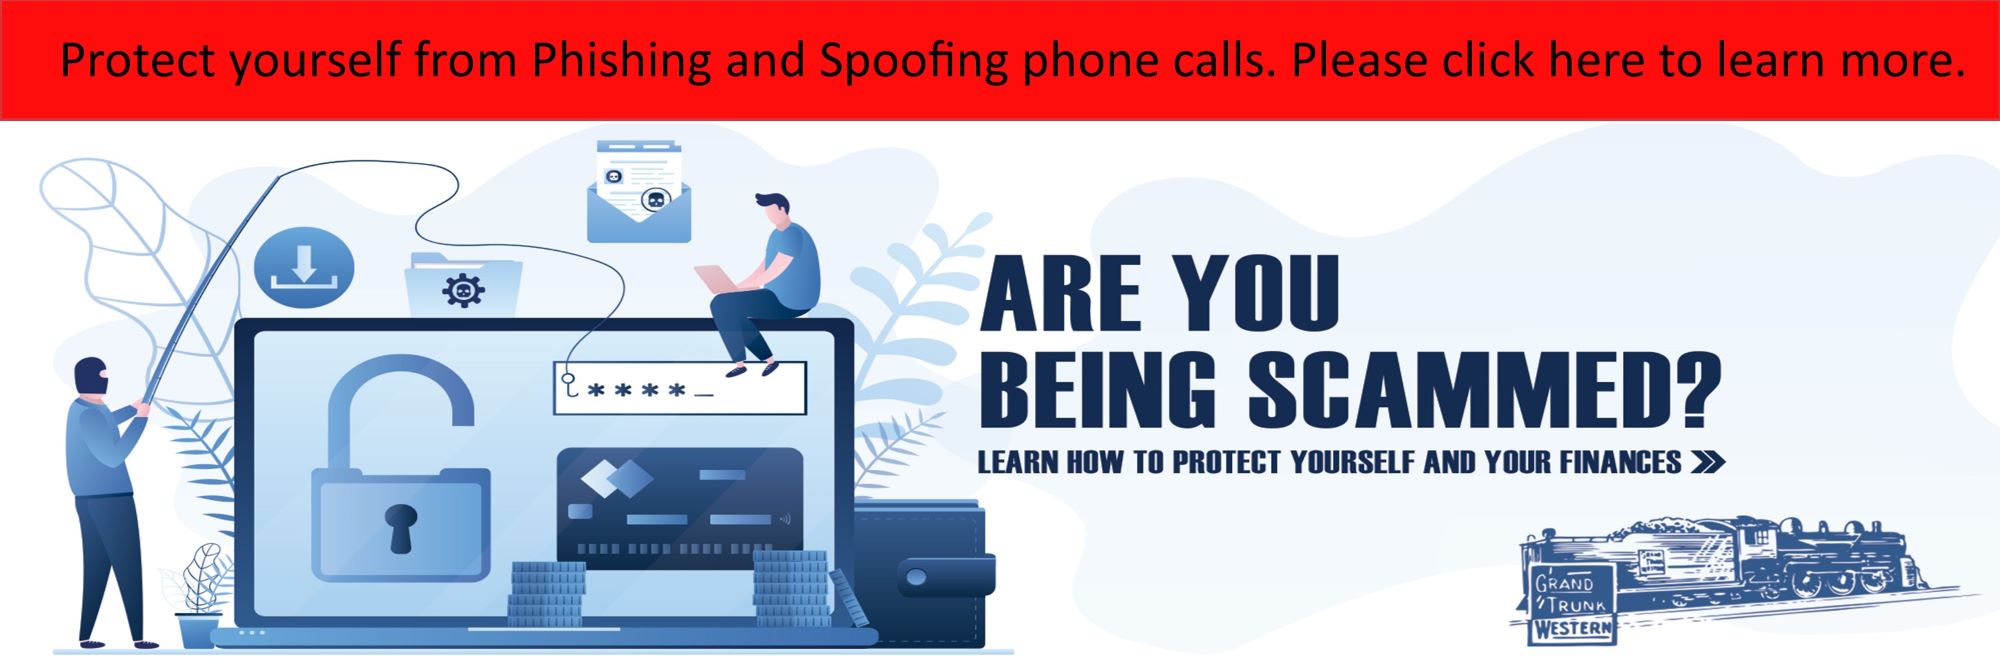 Protect yourself from Phishing and Spoofing phone calls. Are you being scammed? Learn how to protect yourself and your finances.